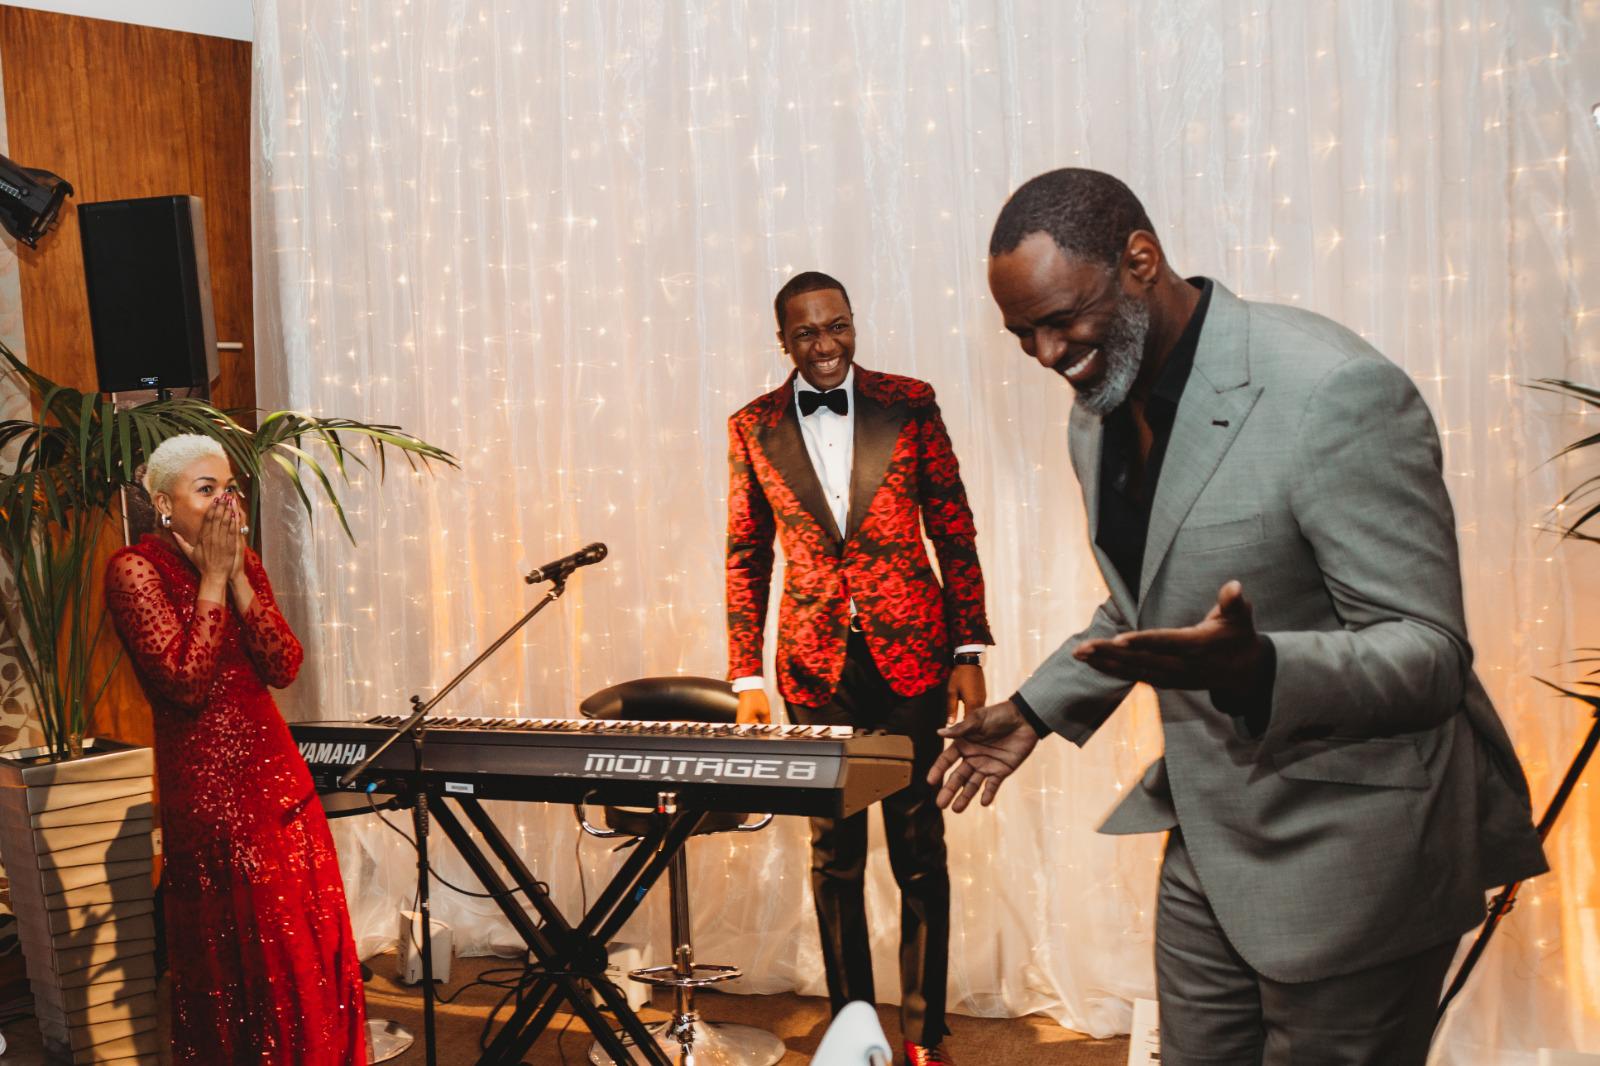 In November 2019, Angel left his wife stunned by getting 16 time Grammy nominated American singer, songwriter, producer and actor Brian McKnight to perform exclusively for their 19th wedding anniversary in London.